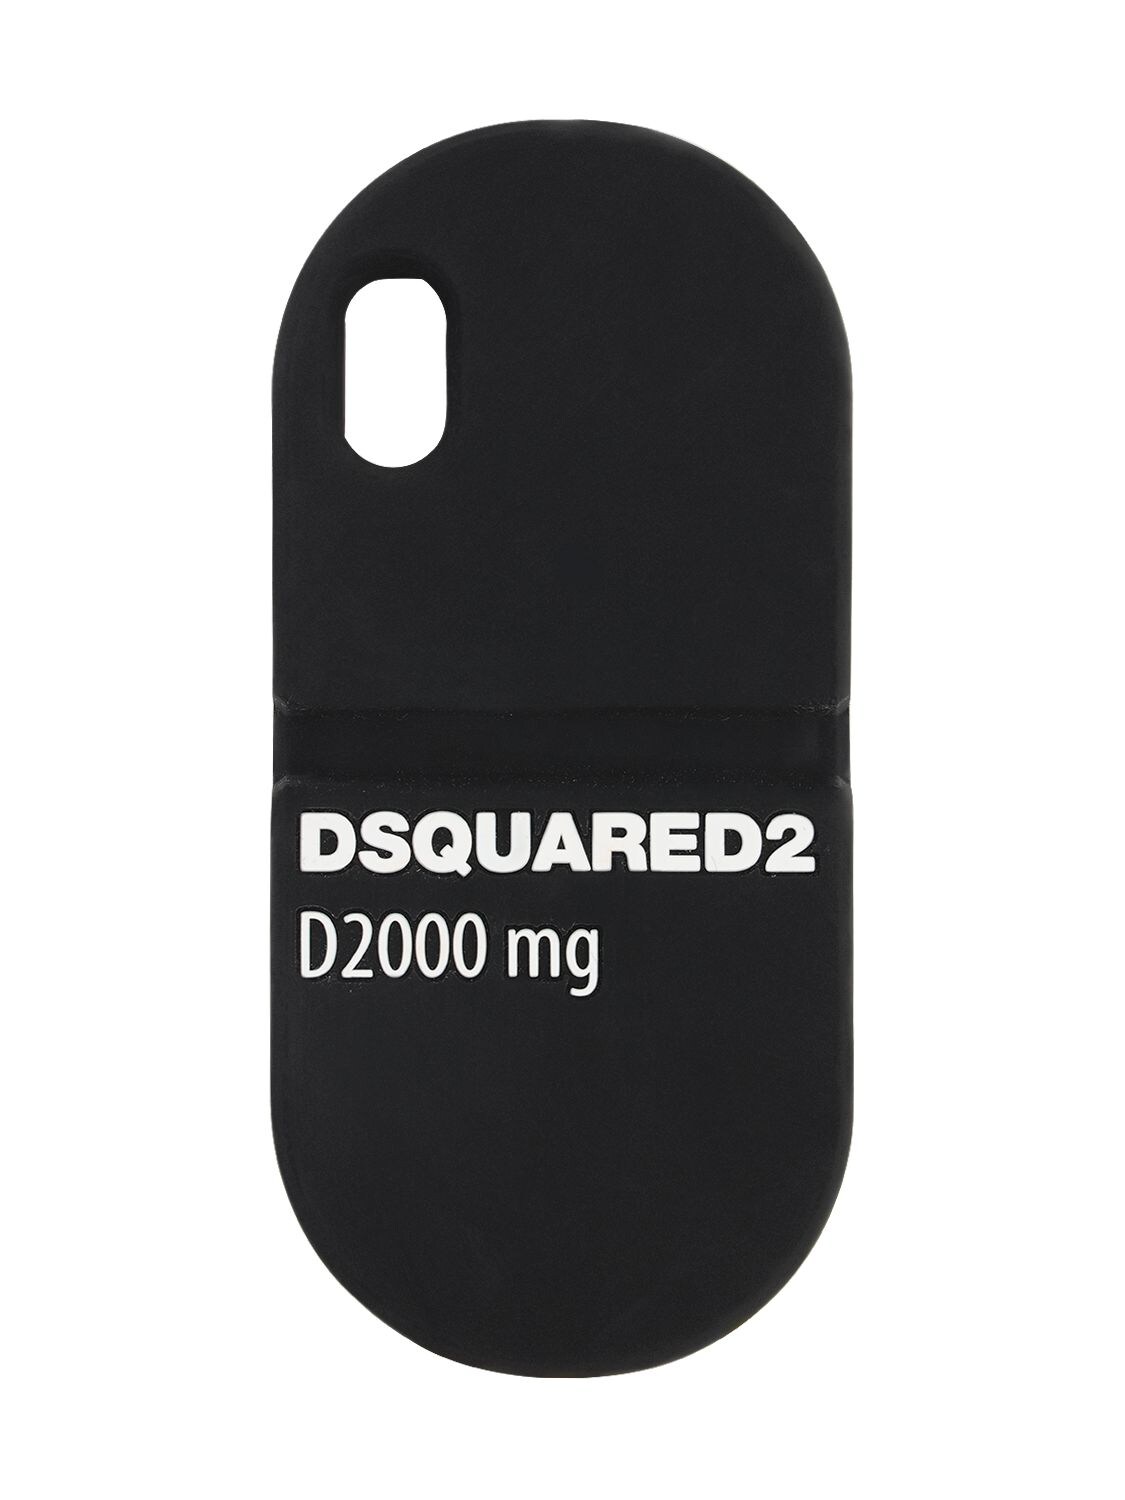 Dsquared2 Pils Iphone X Cover In Black